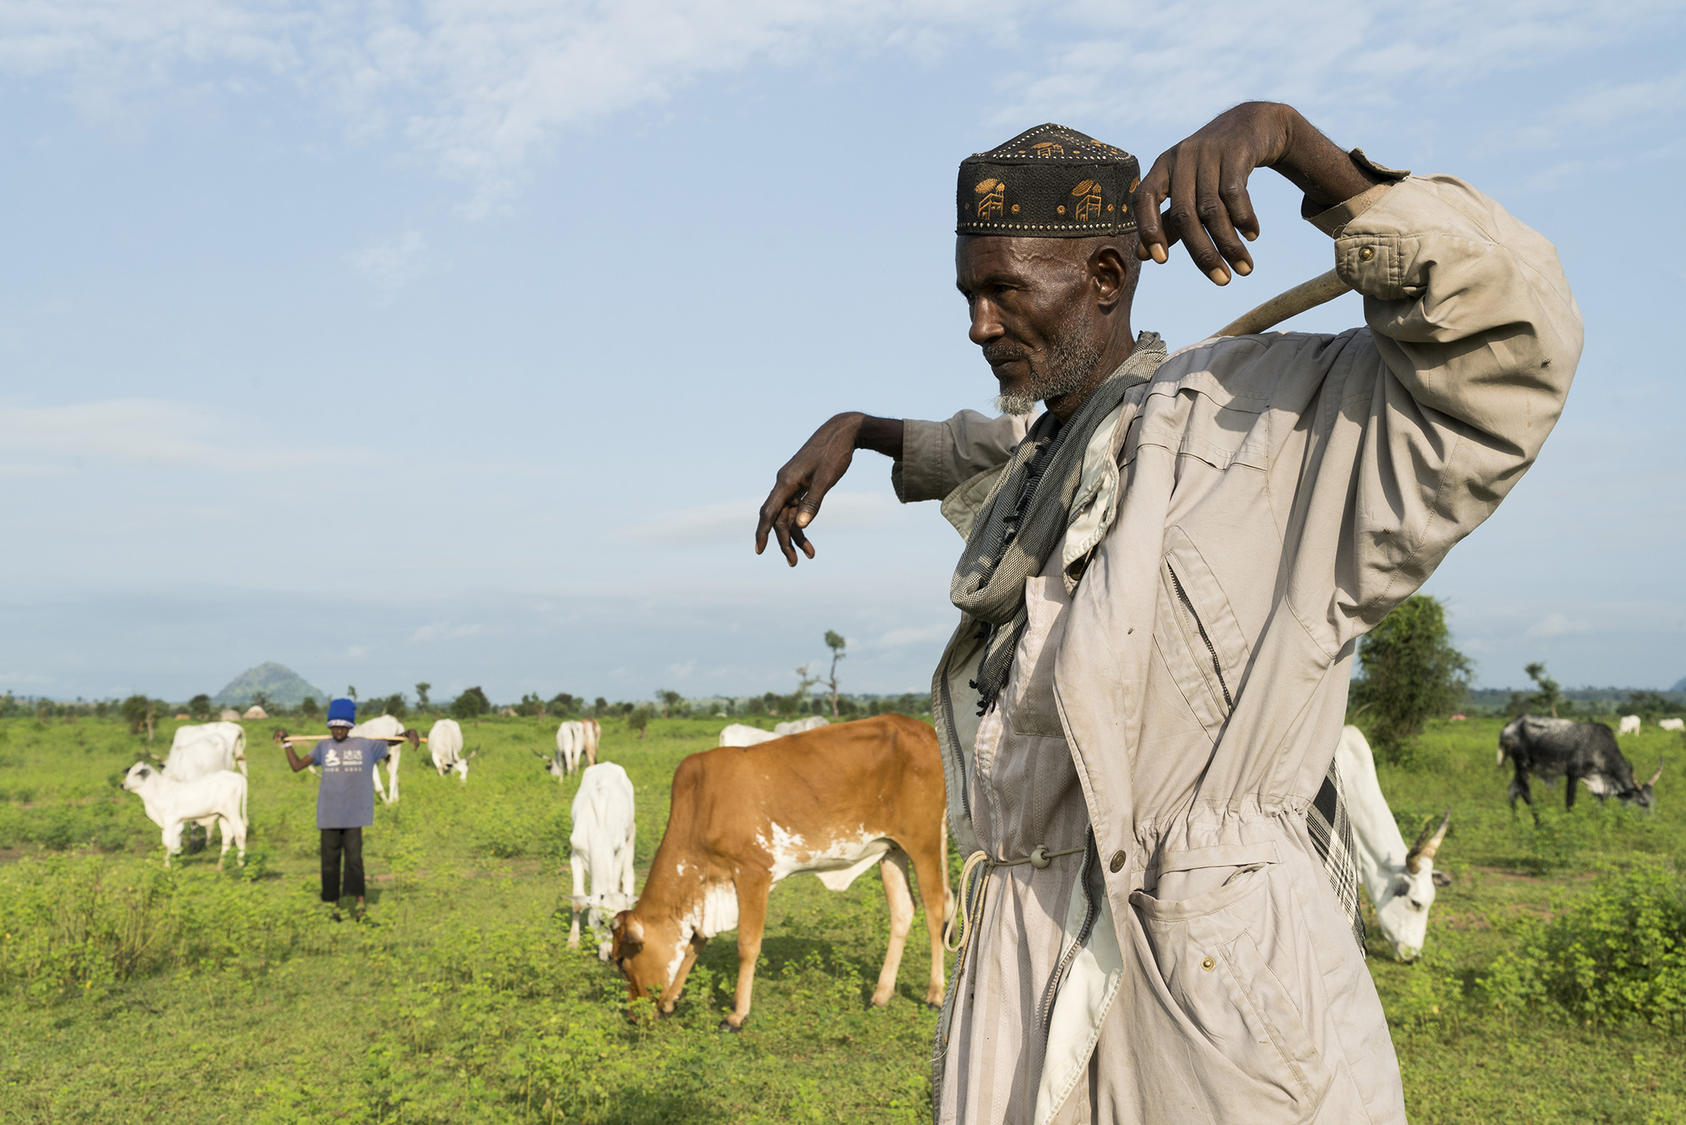 A herder watches his cows graze outside of the village of Koboga, Nigeria, Sept. 4, 2018. Photo courtesy of Adriane Ohanesian/The New York Times.